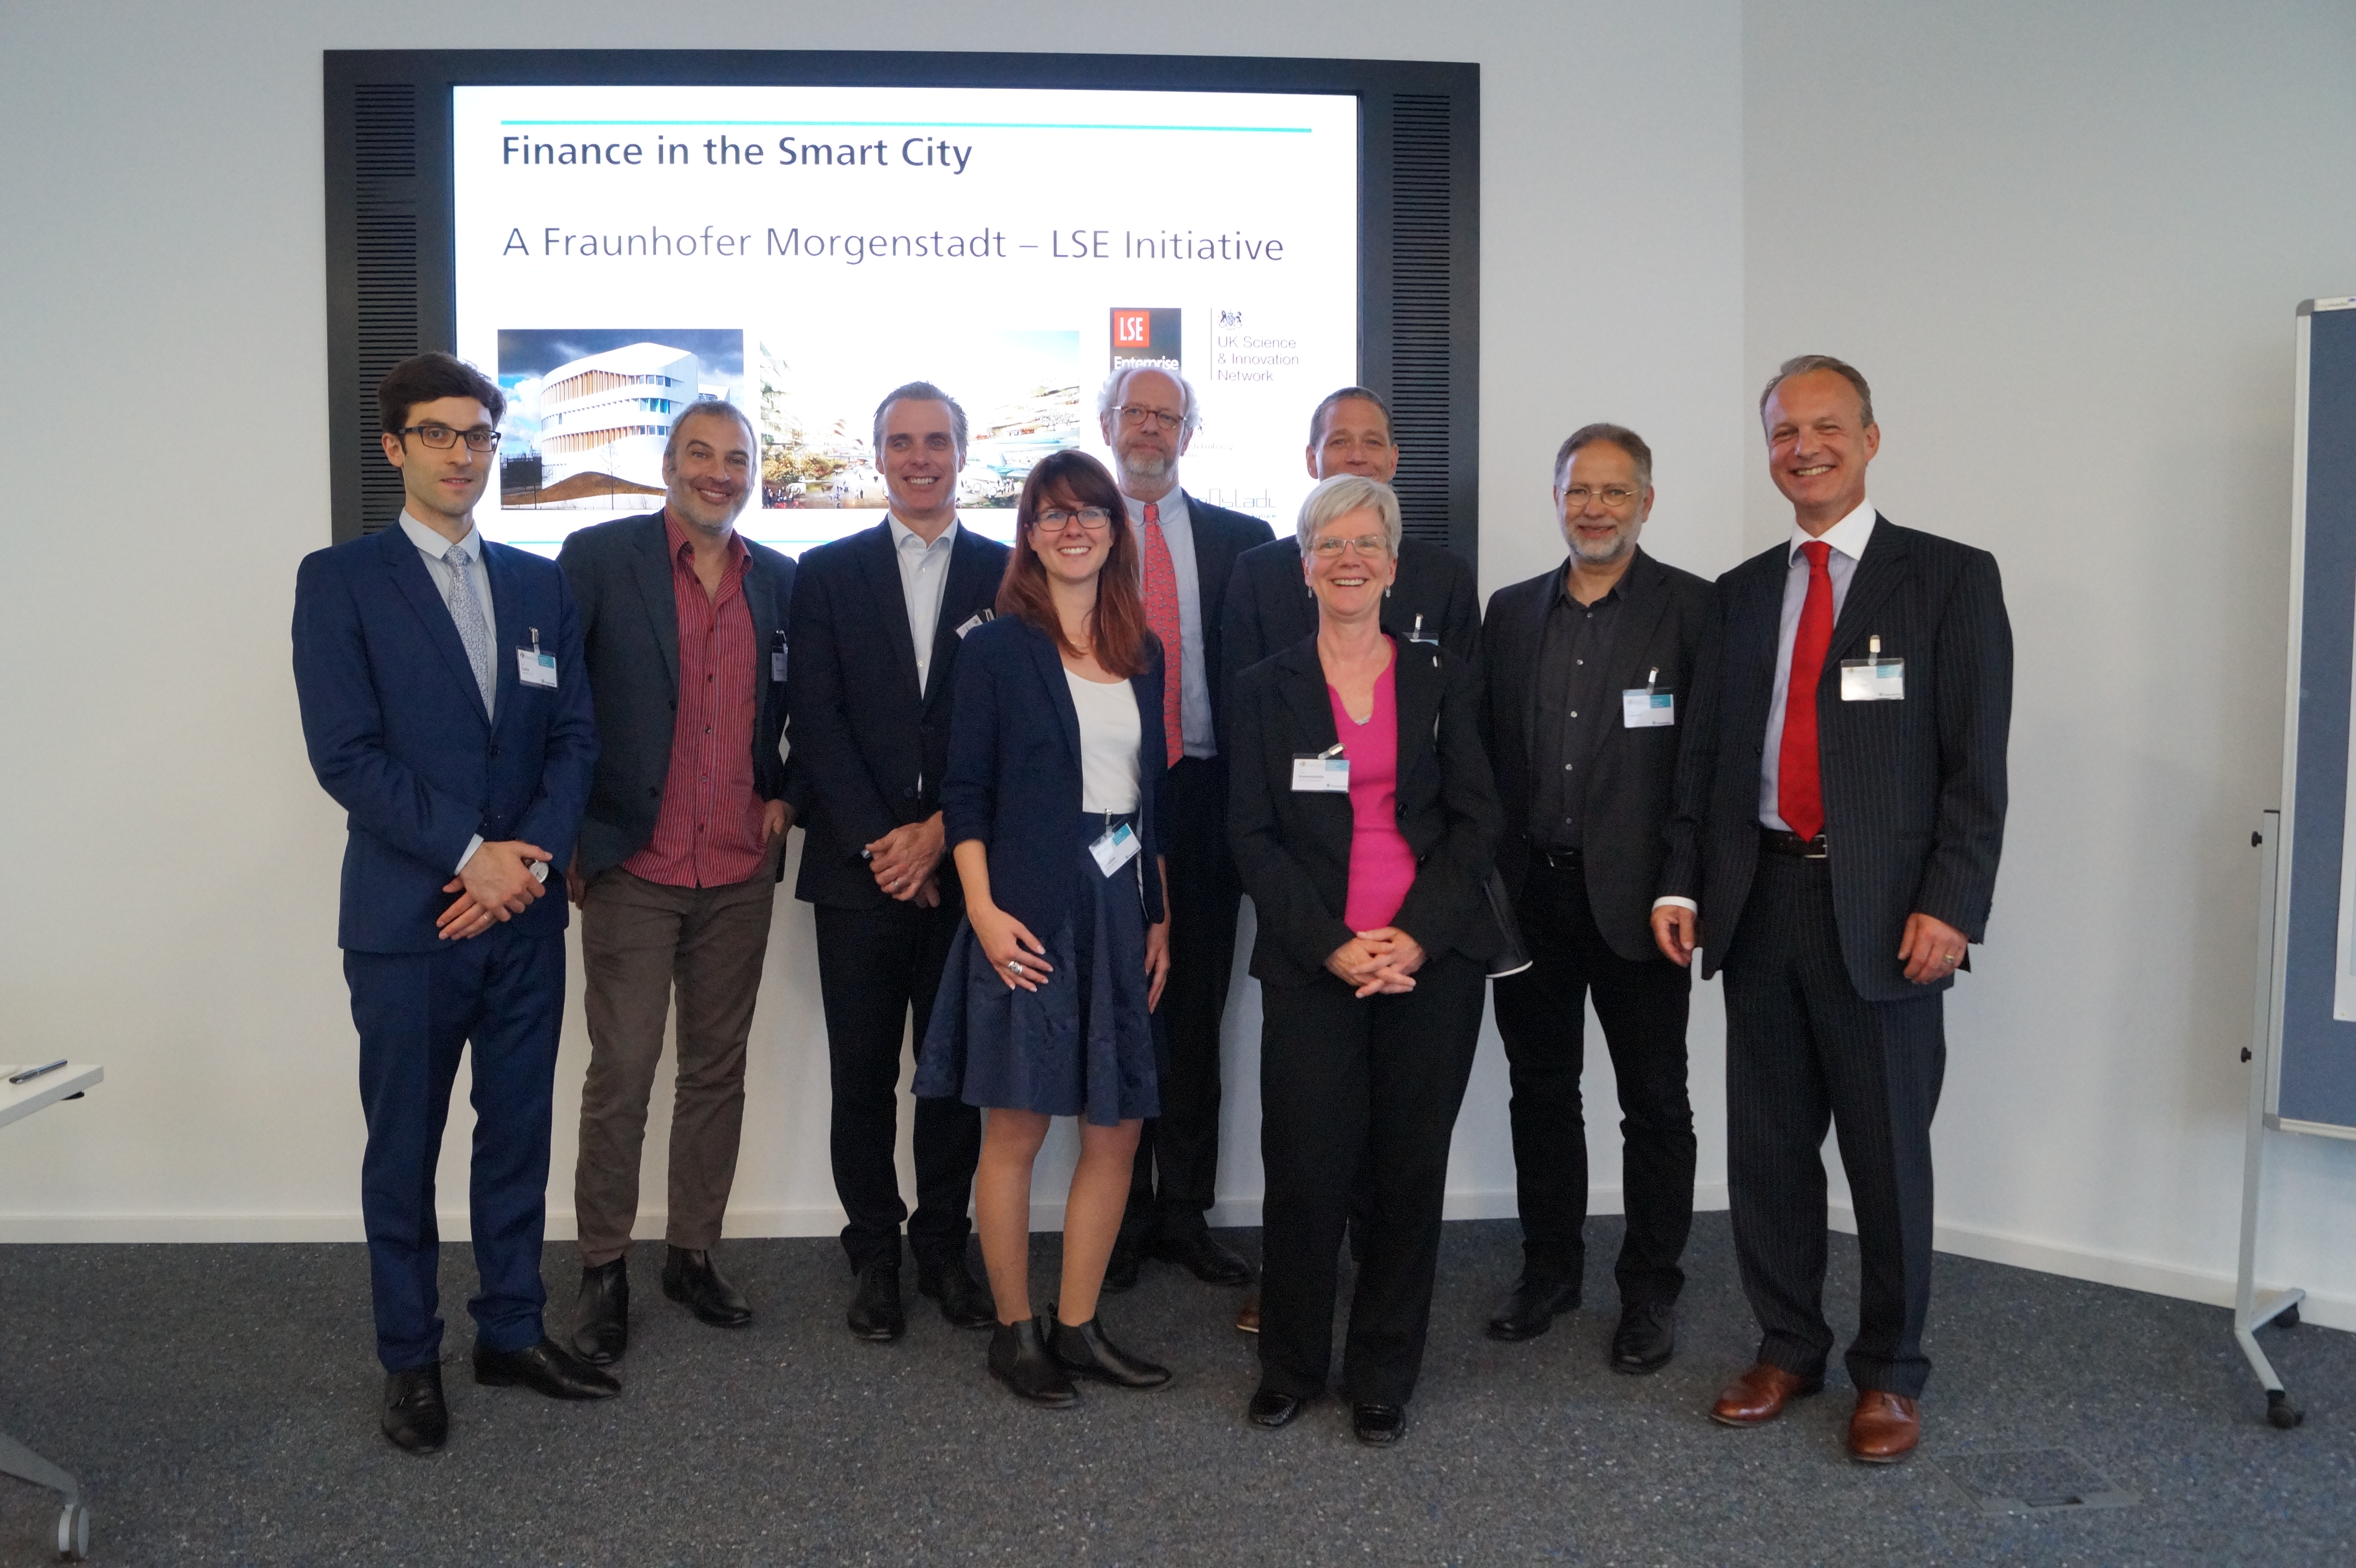 Morgenstadt-Financing-in-the-SmartCity-Fraunhofer